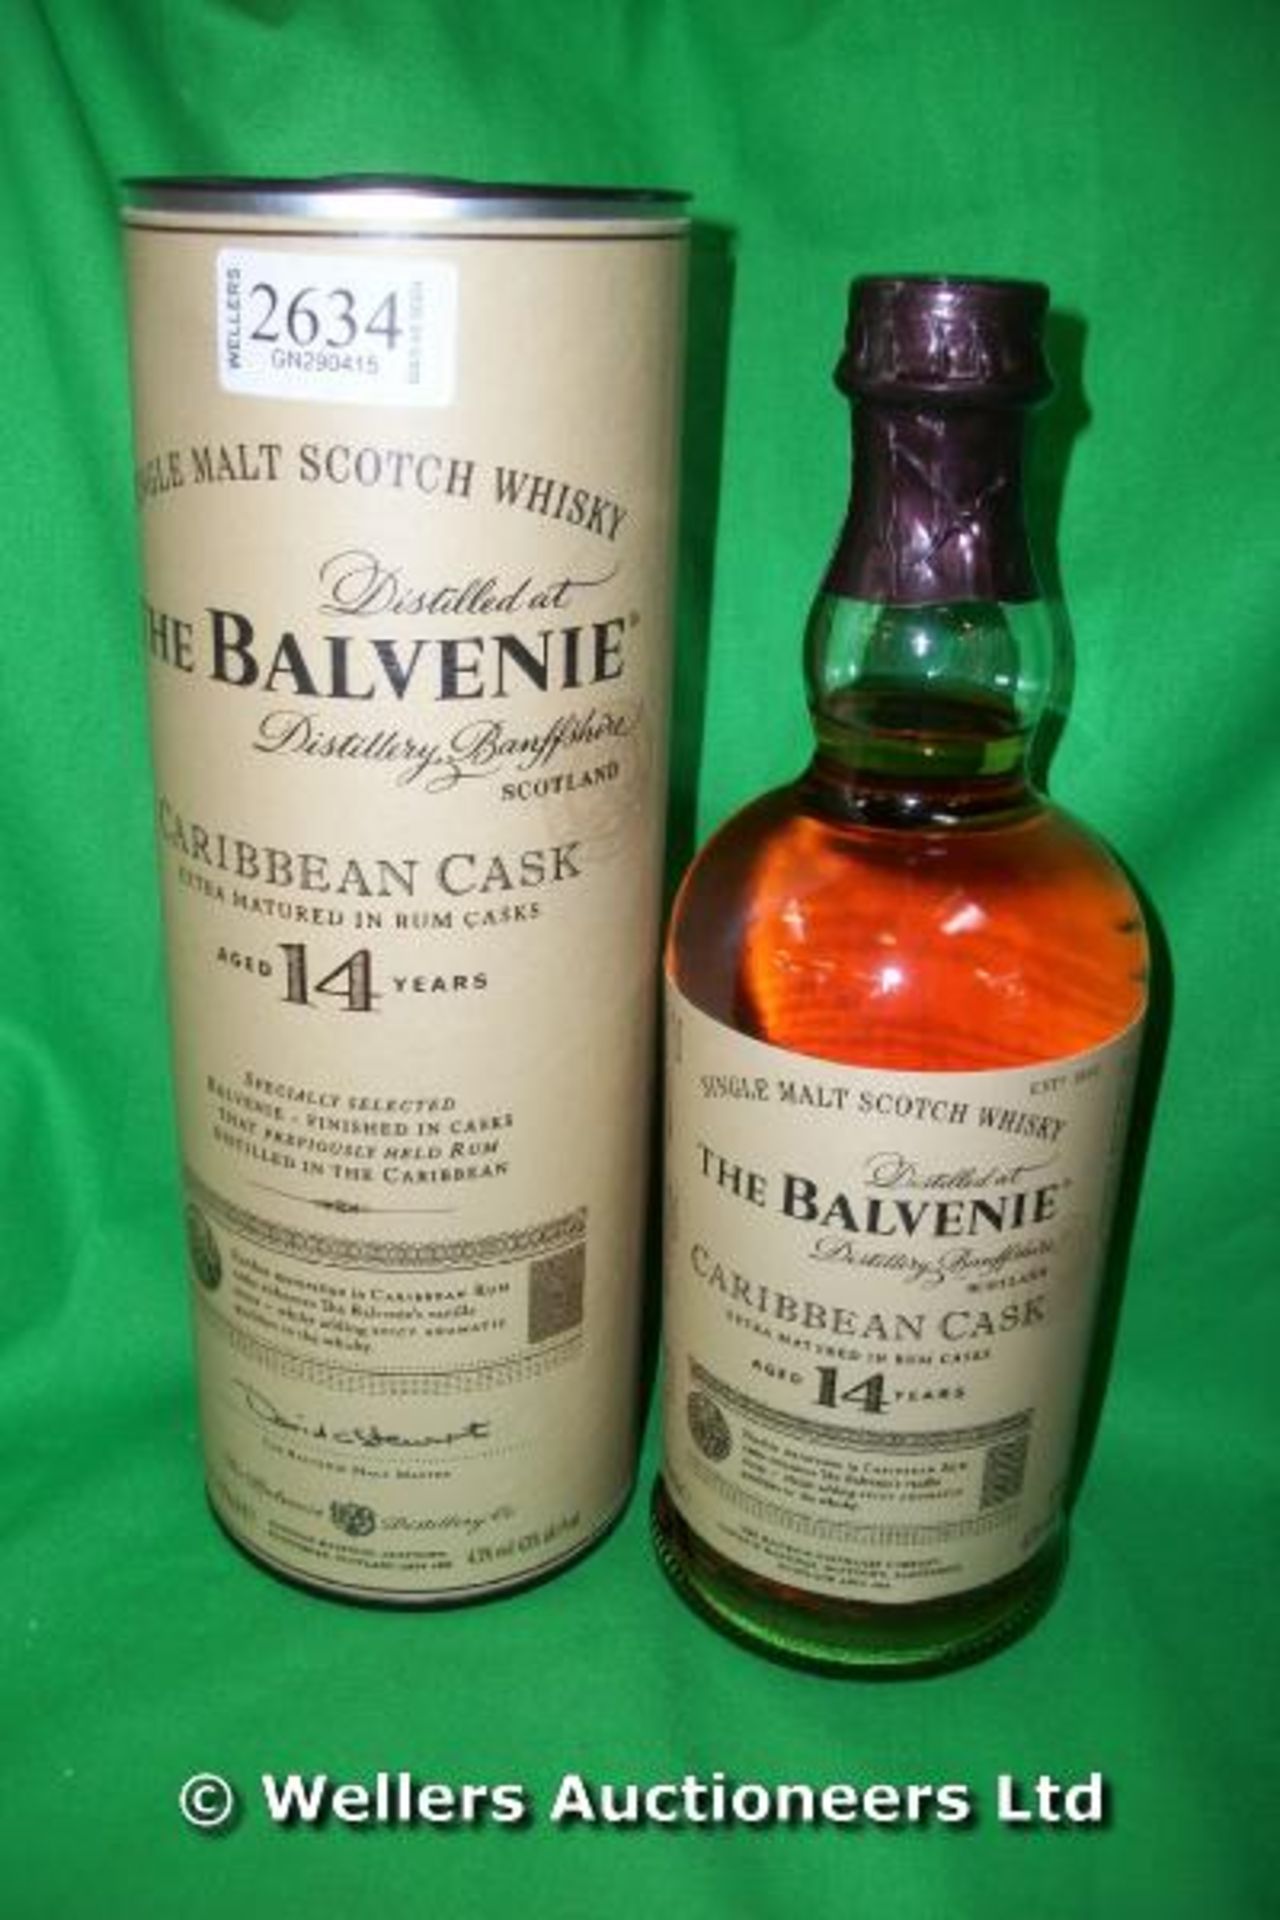 *THE BALVENIE CARIBBEAN CASK EXTRA MATURED IN RUM CASKS AGED 14 YEARS WHISKY 70CL / BOXED (DC1)[